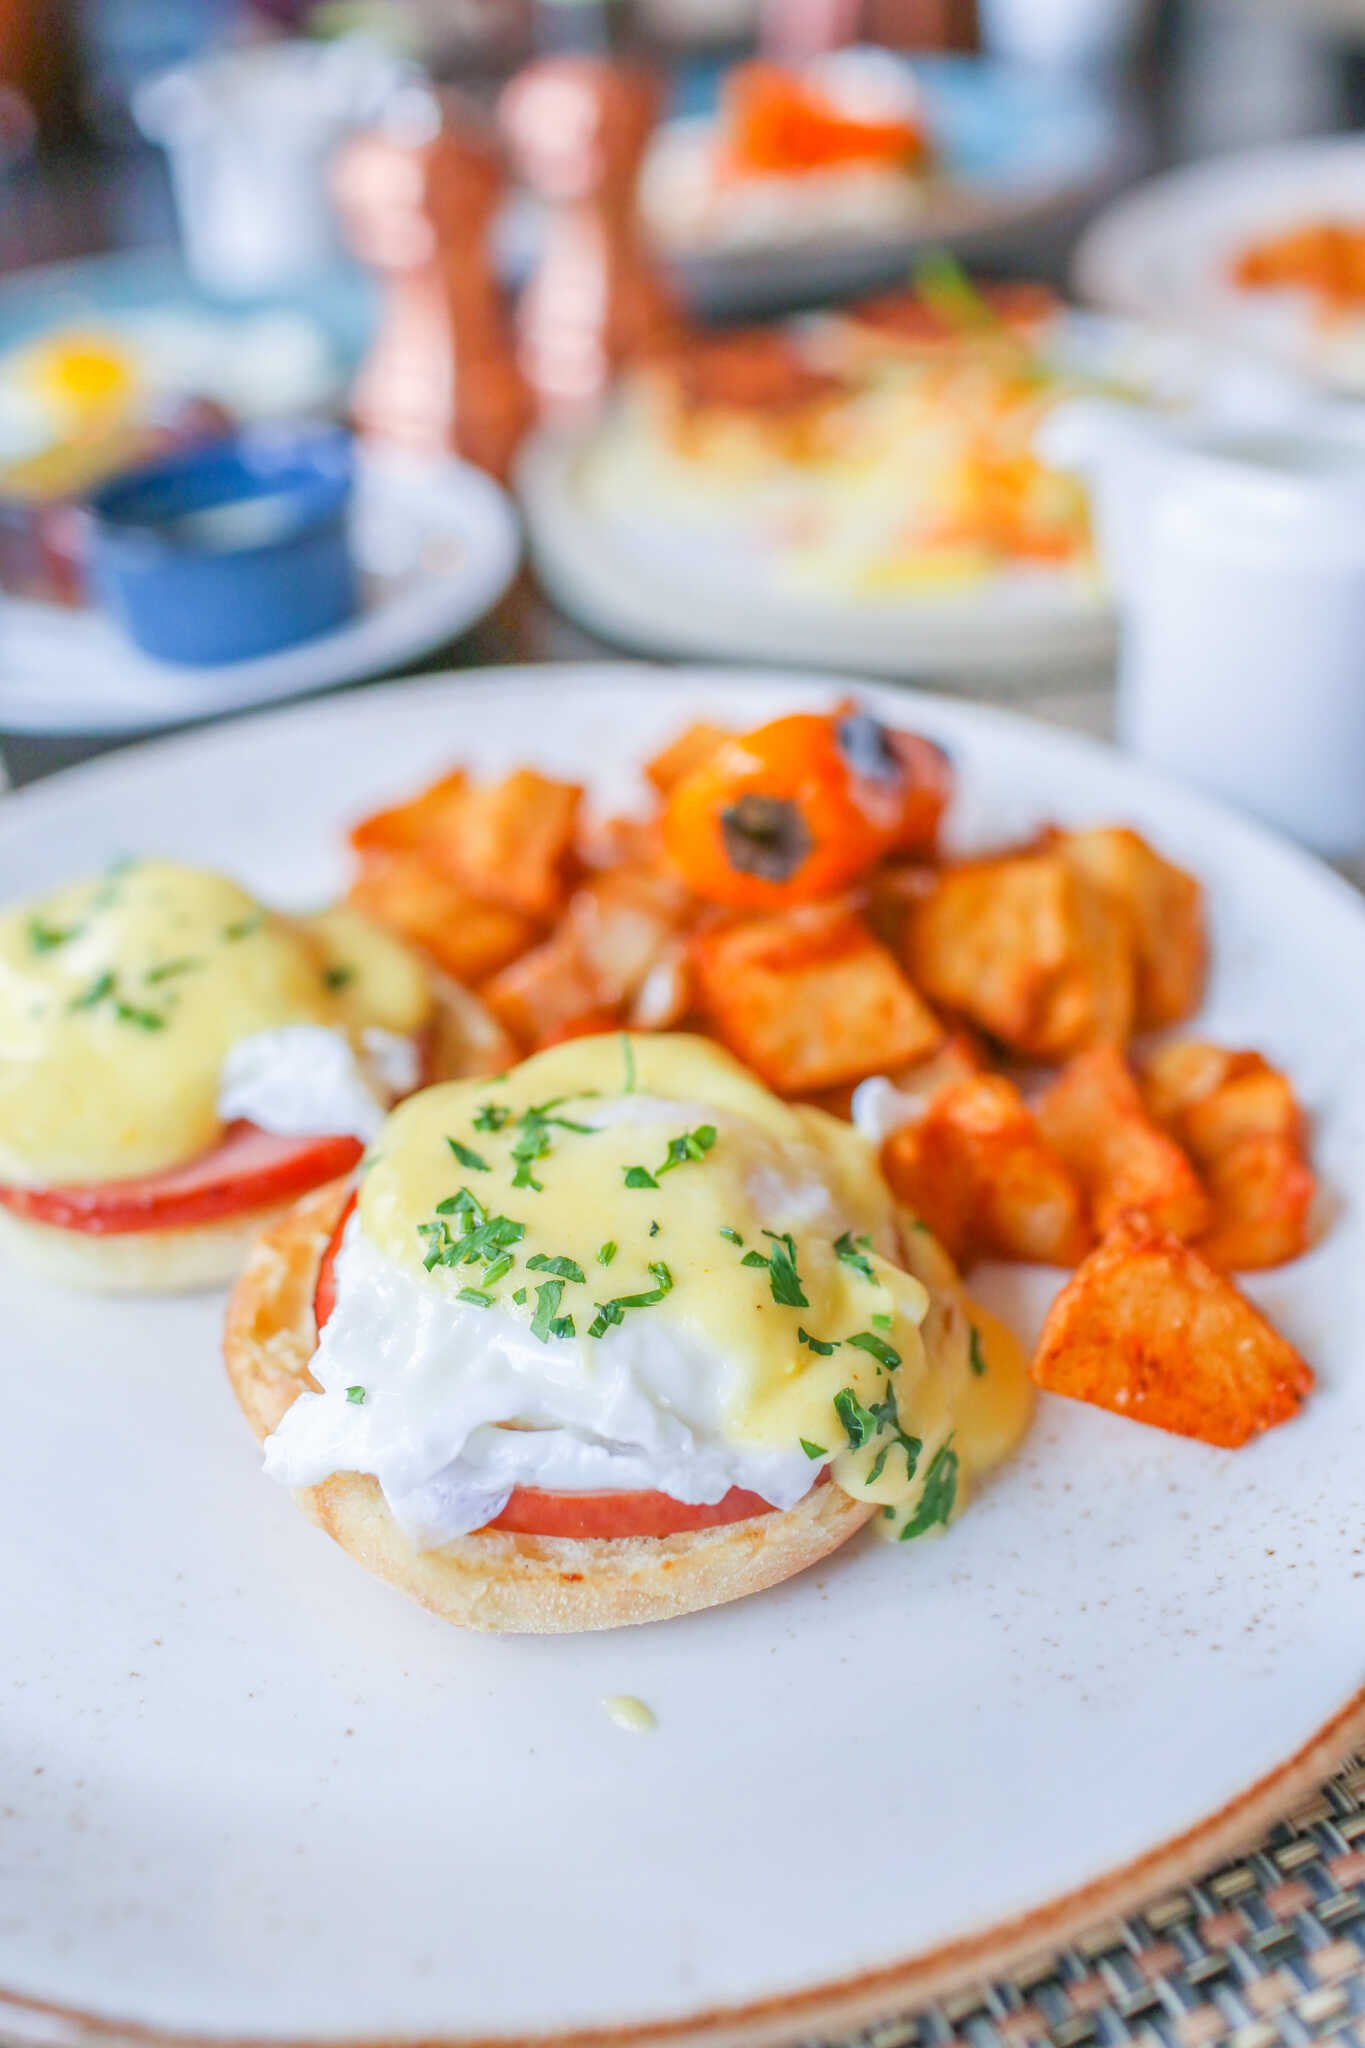 Top 10 Instagrammable Places in San Jose - Brunch at the Signia by Hilton San Jose